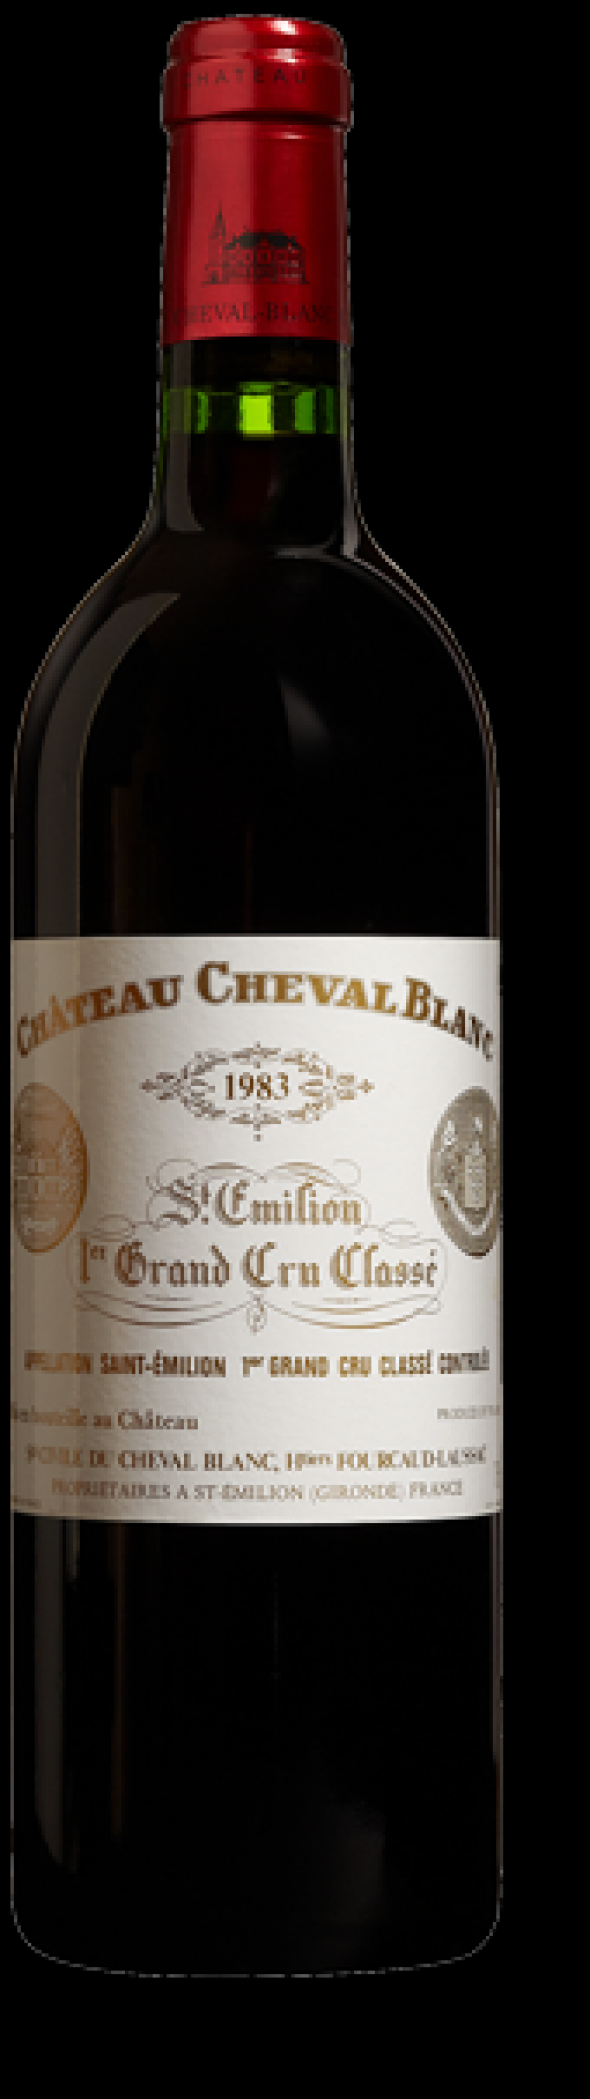 Lot of 2 bottles Château Cheval Blanc 1928 & 1983